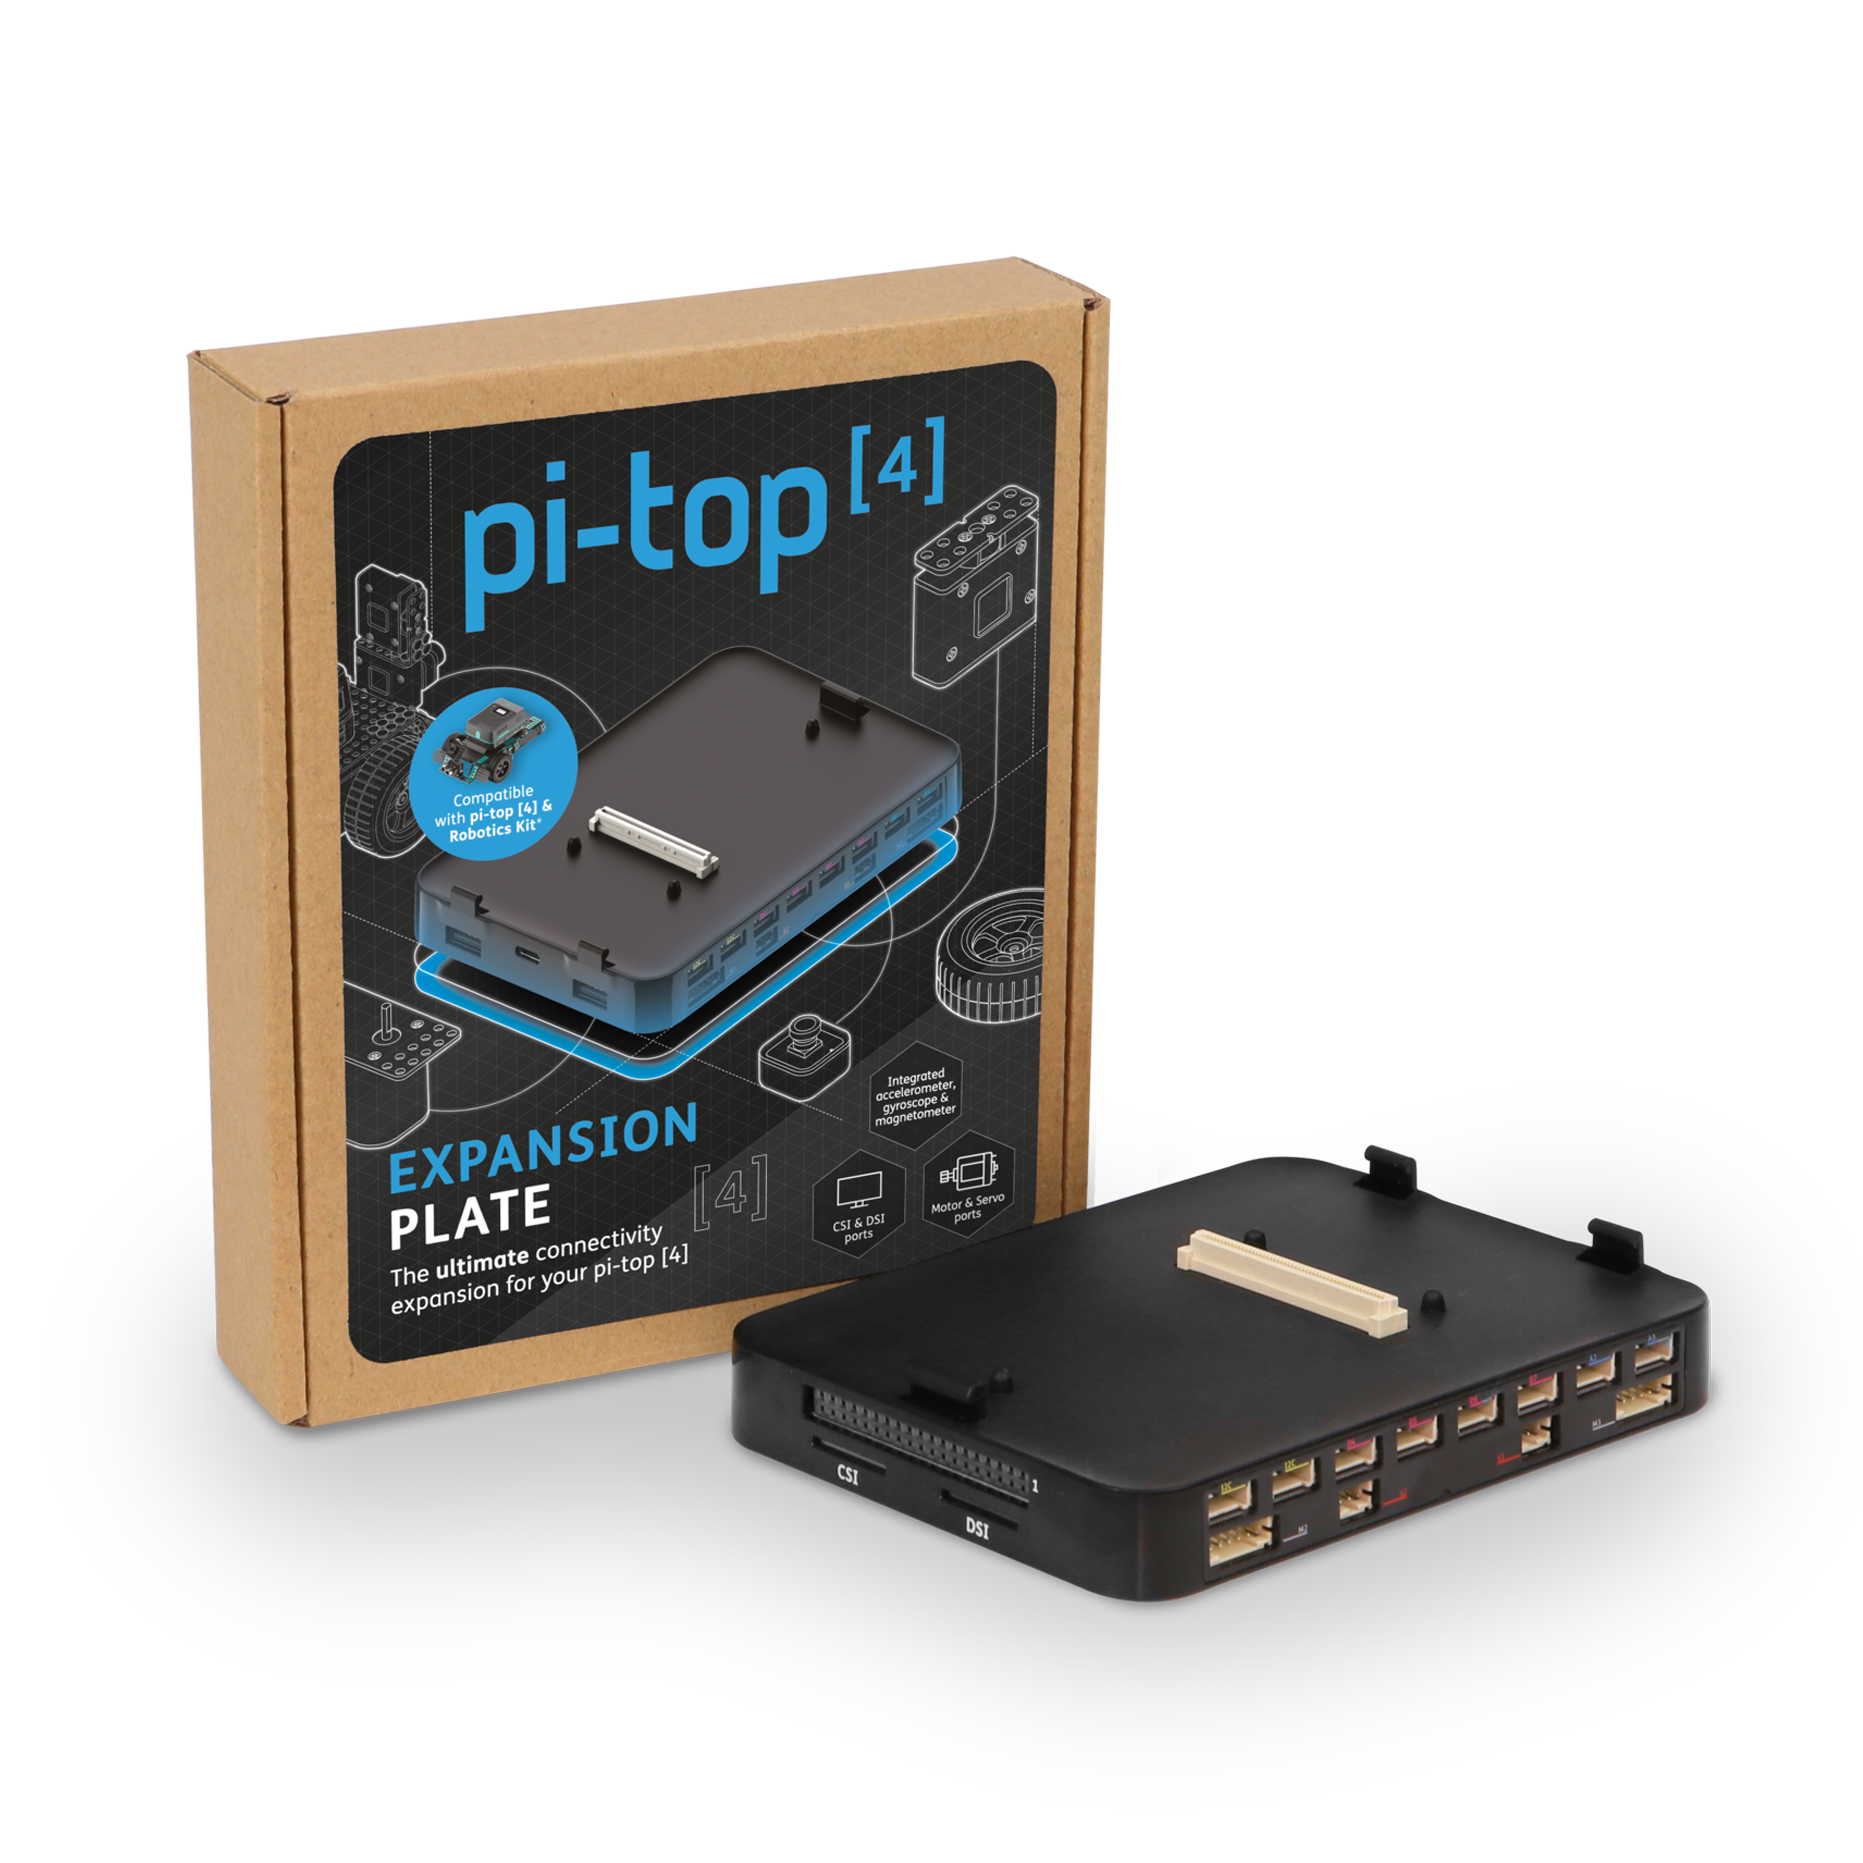 Pi-Top [4] Expansion Plate